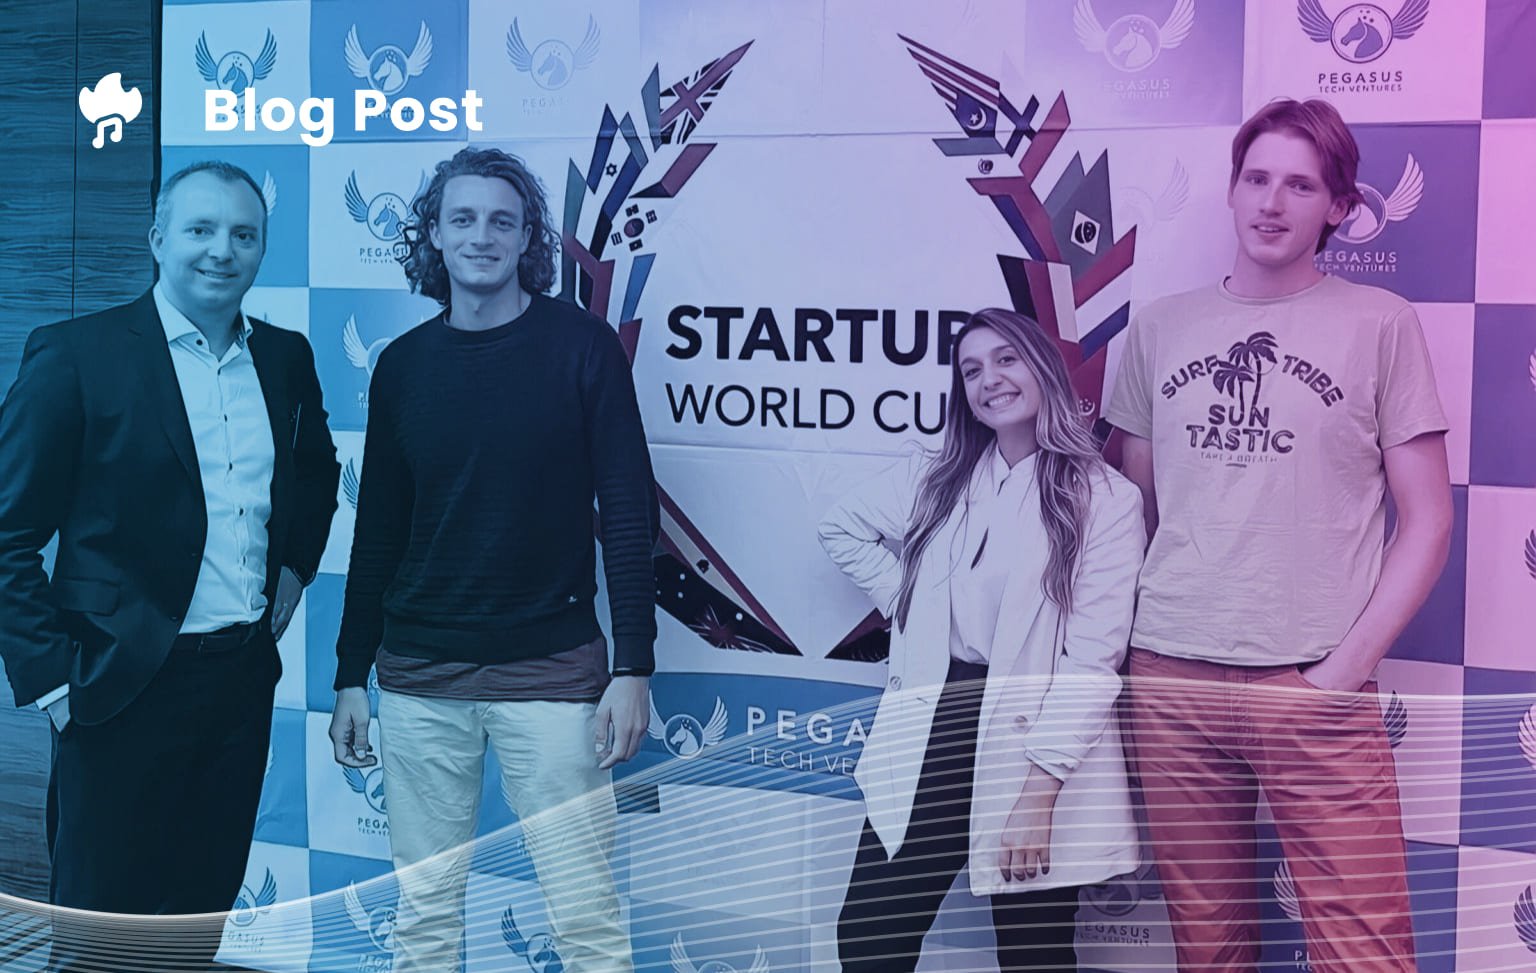 ANote Music among the top 10 startups in the world